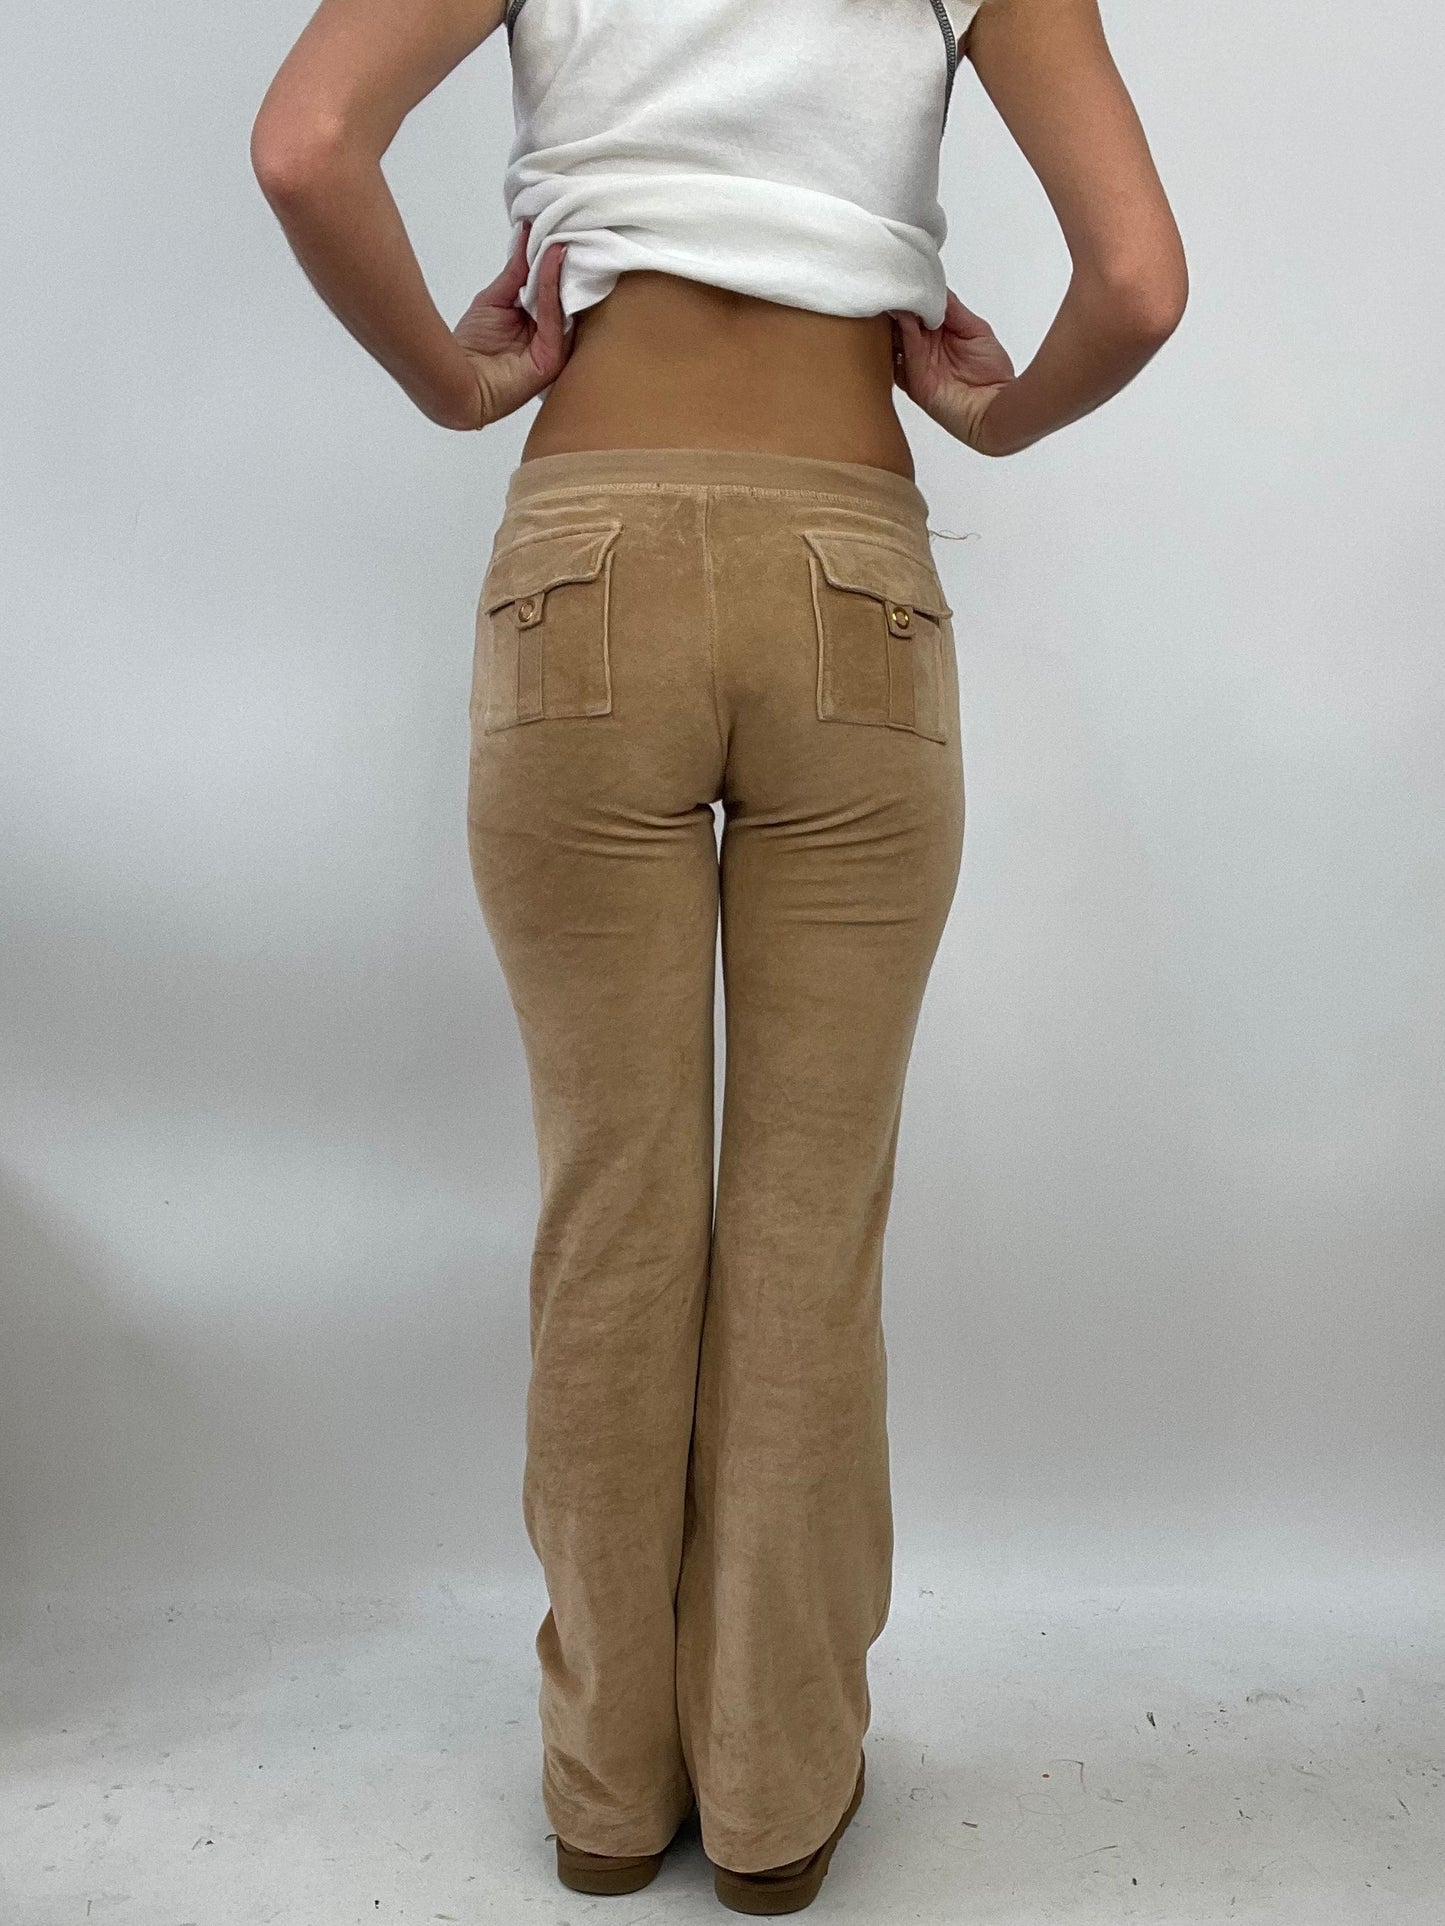 ADDISON RAE DROP | small camel velour trackies